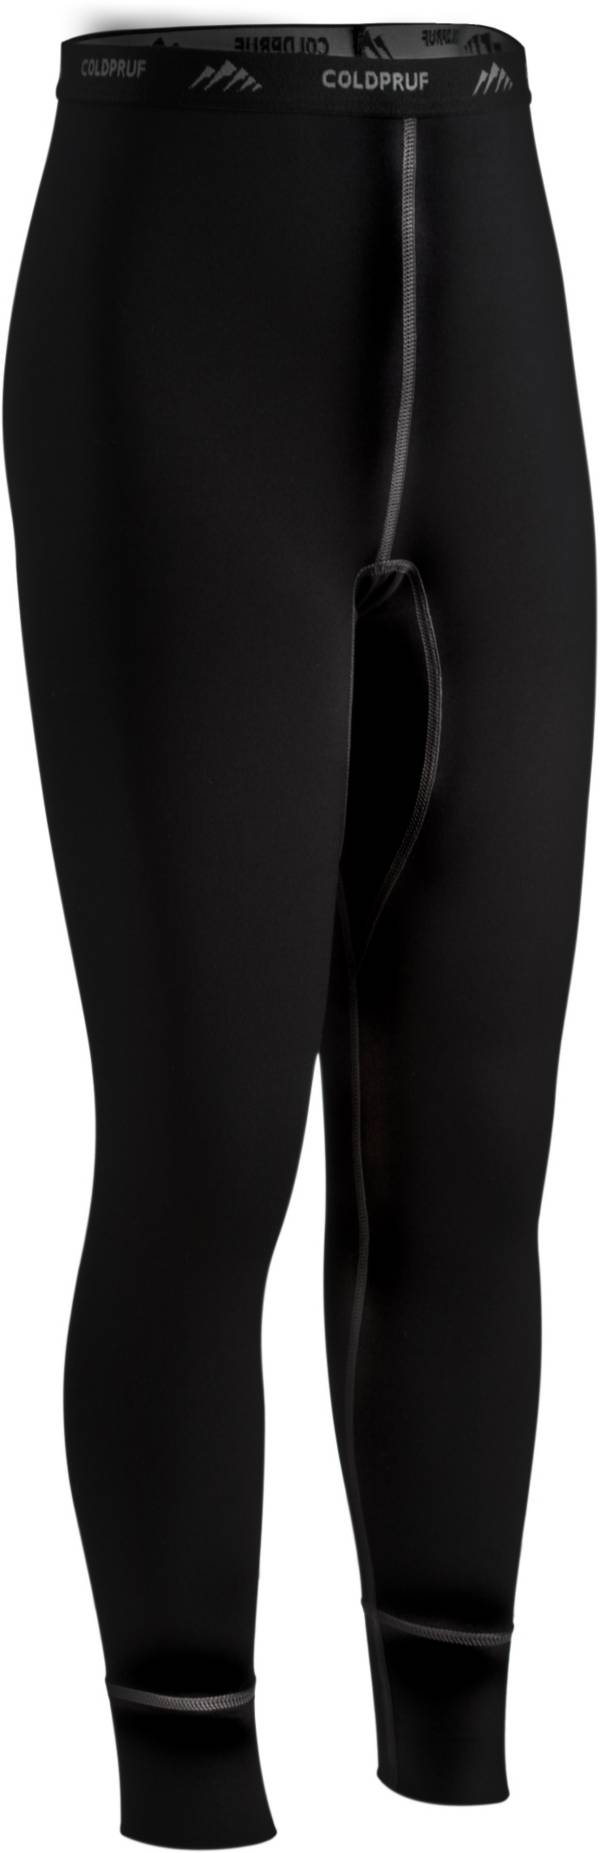 ColdPruf Kids' Quest Performance Base Layer Leggings product image